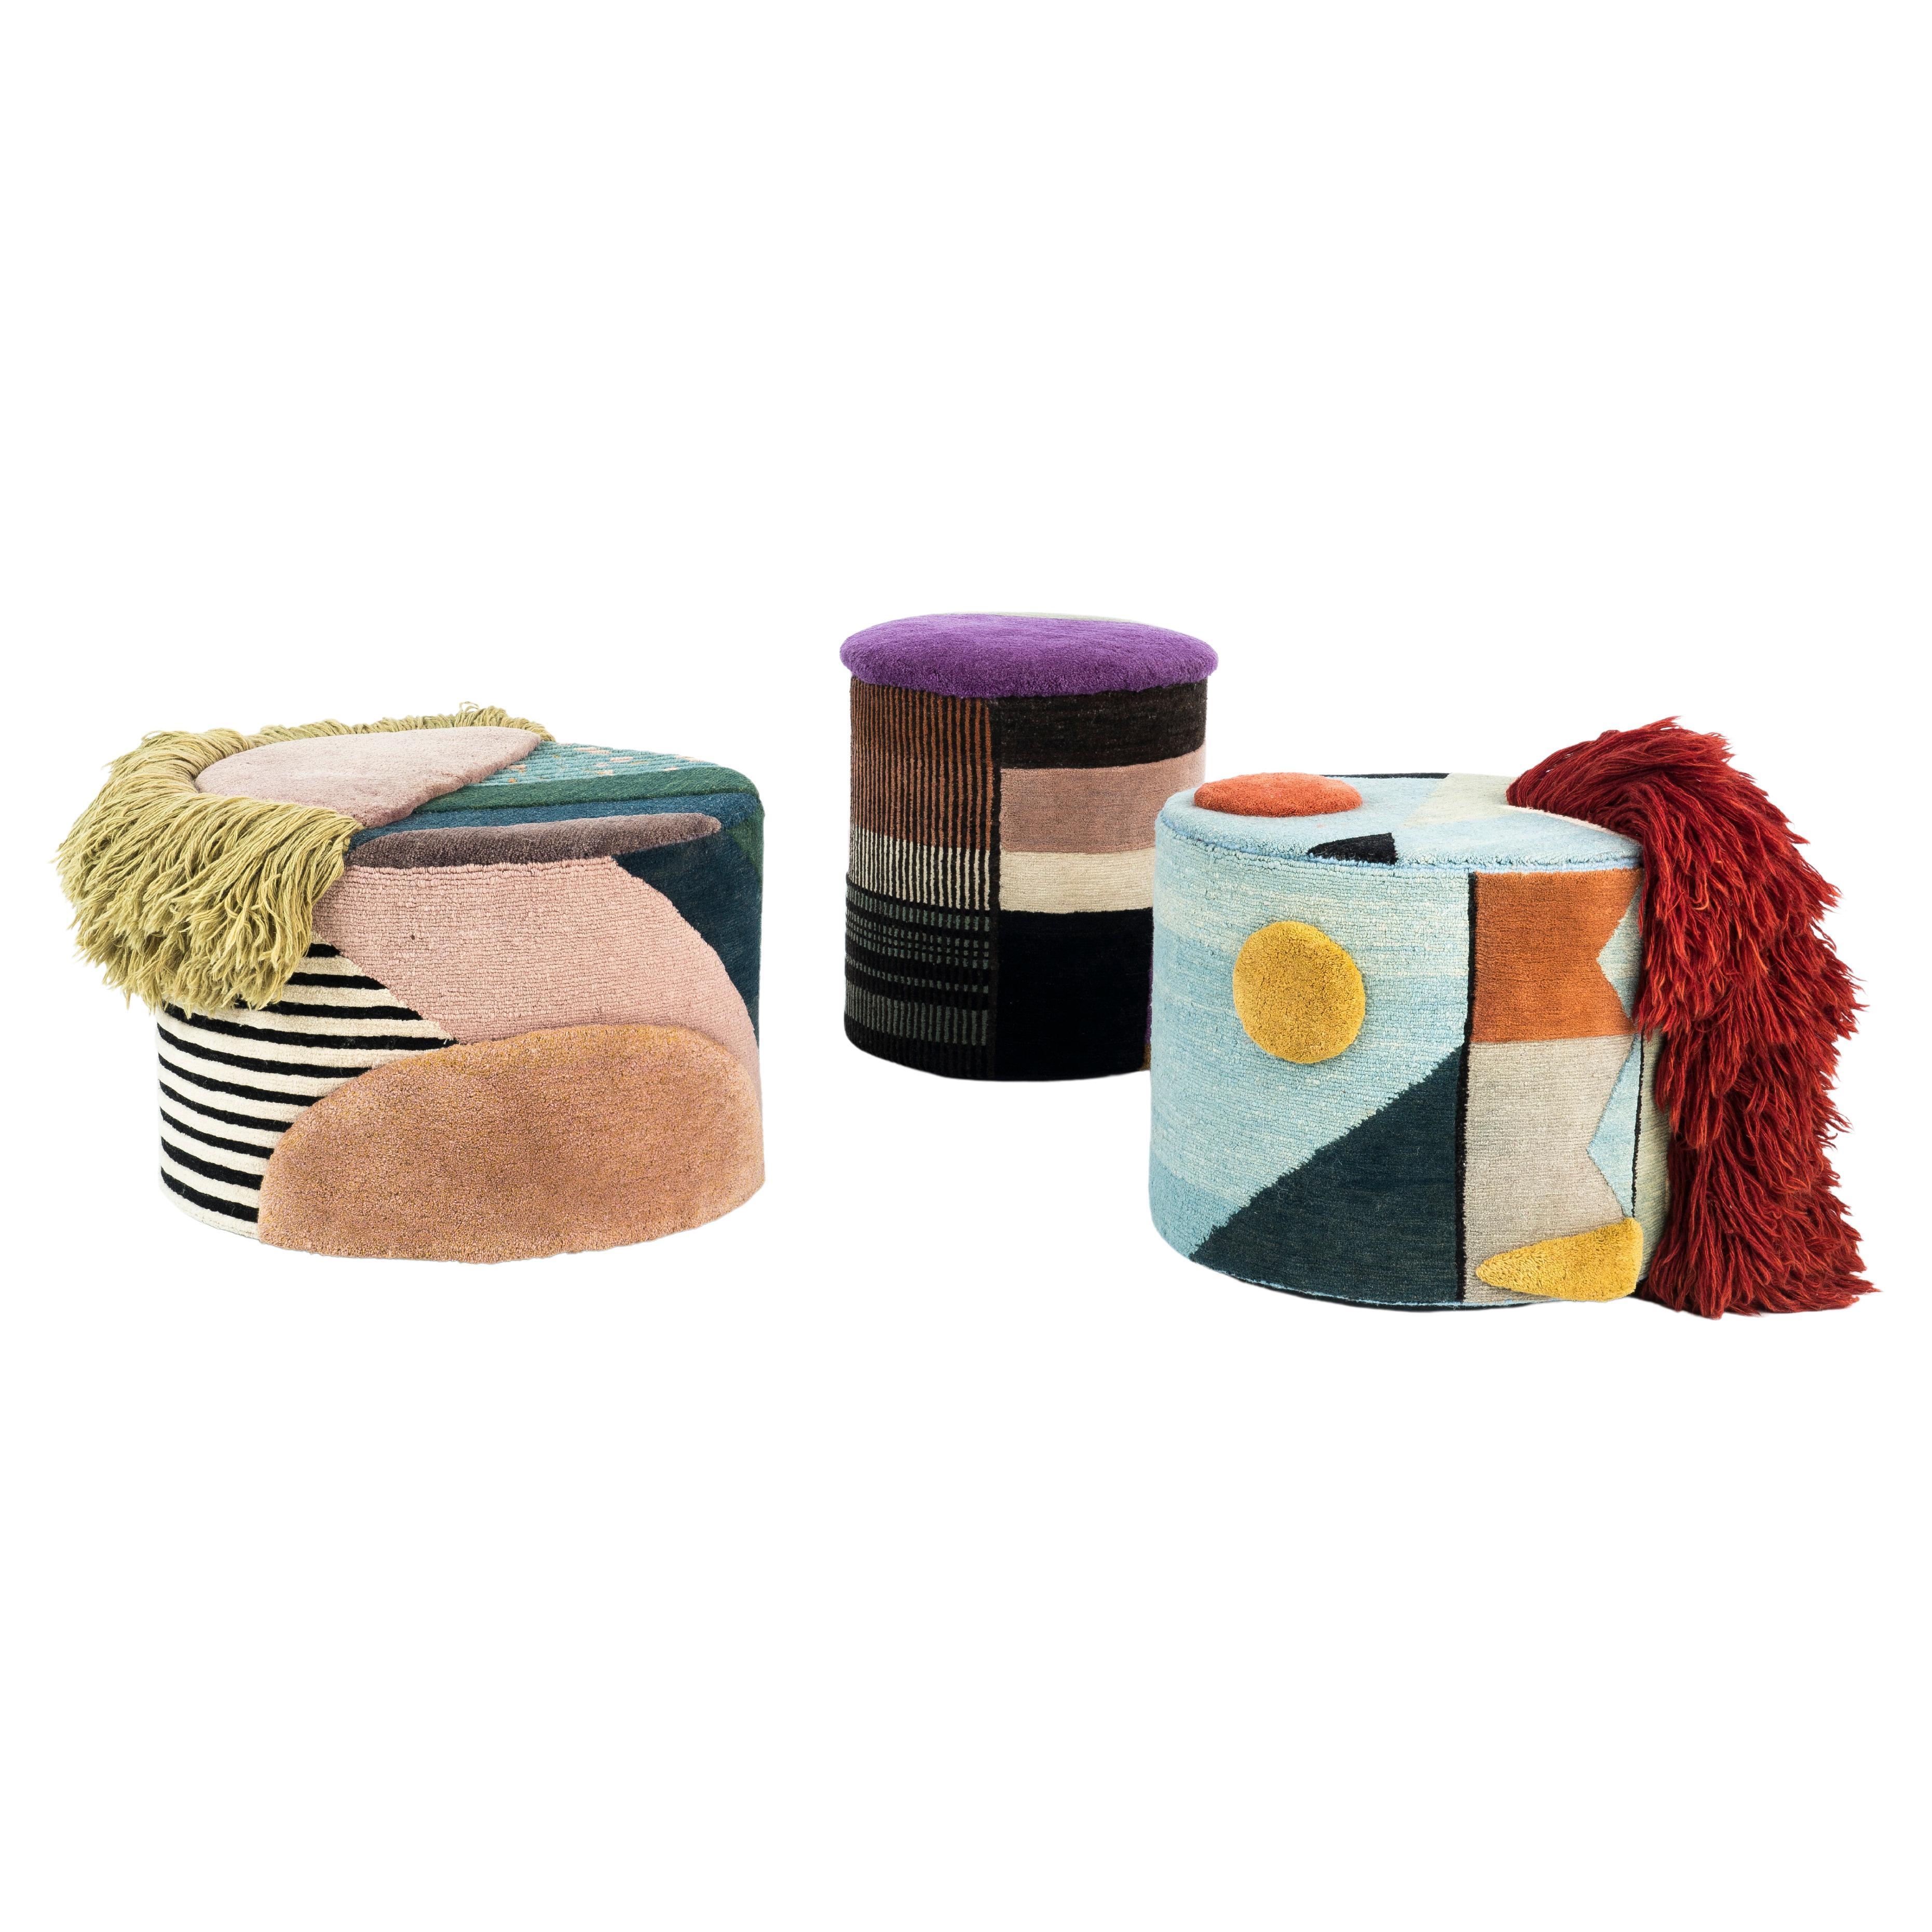 Set of 3 Poufs Charaktere Fred, Massimiliano and Colette by Lyk Carpet